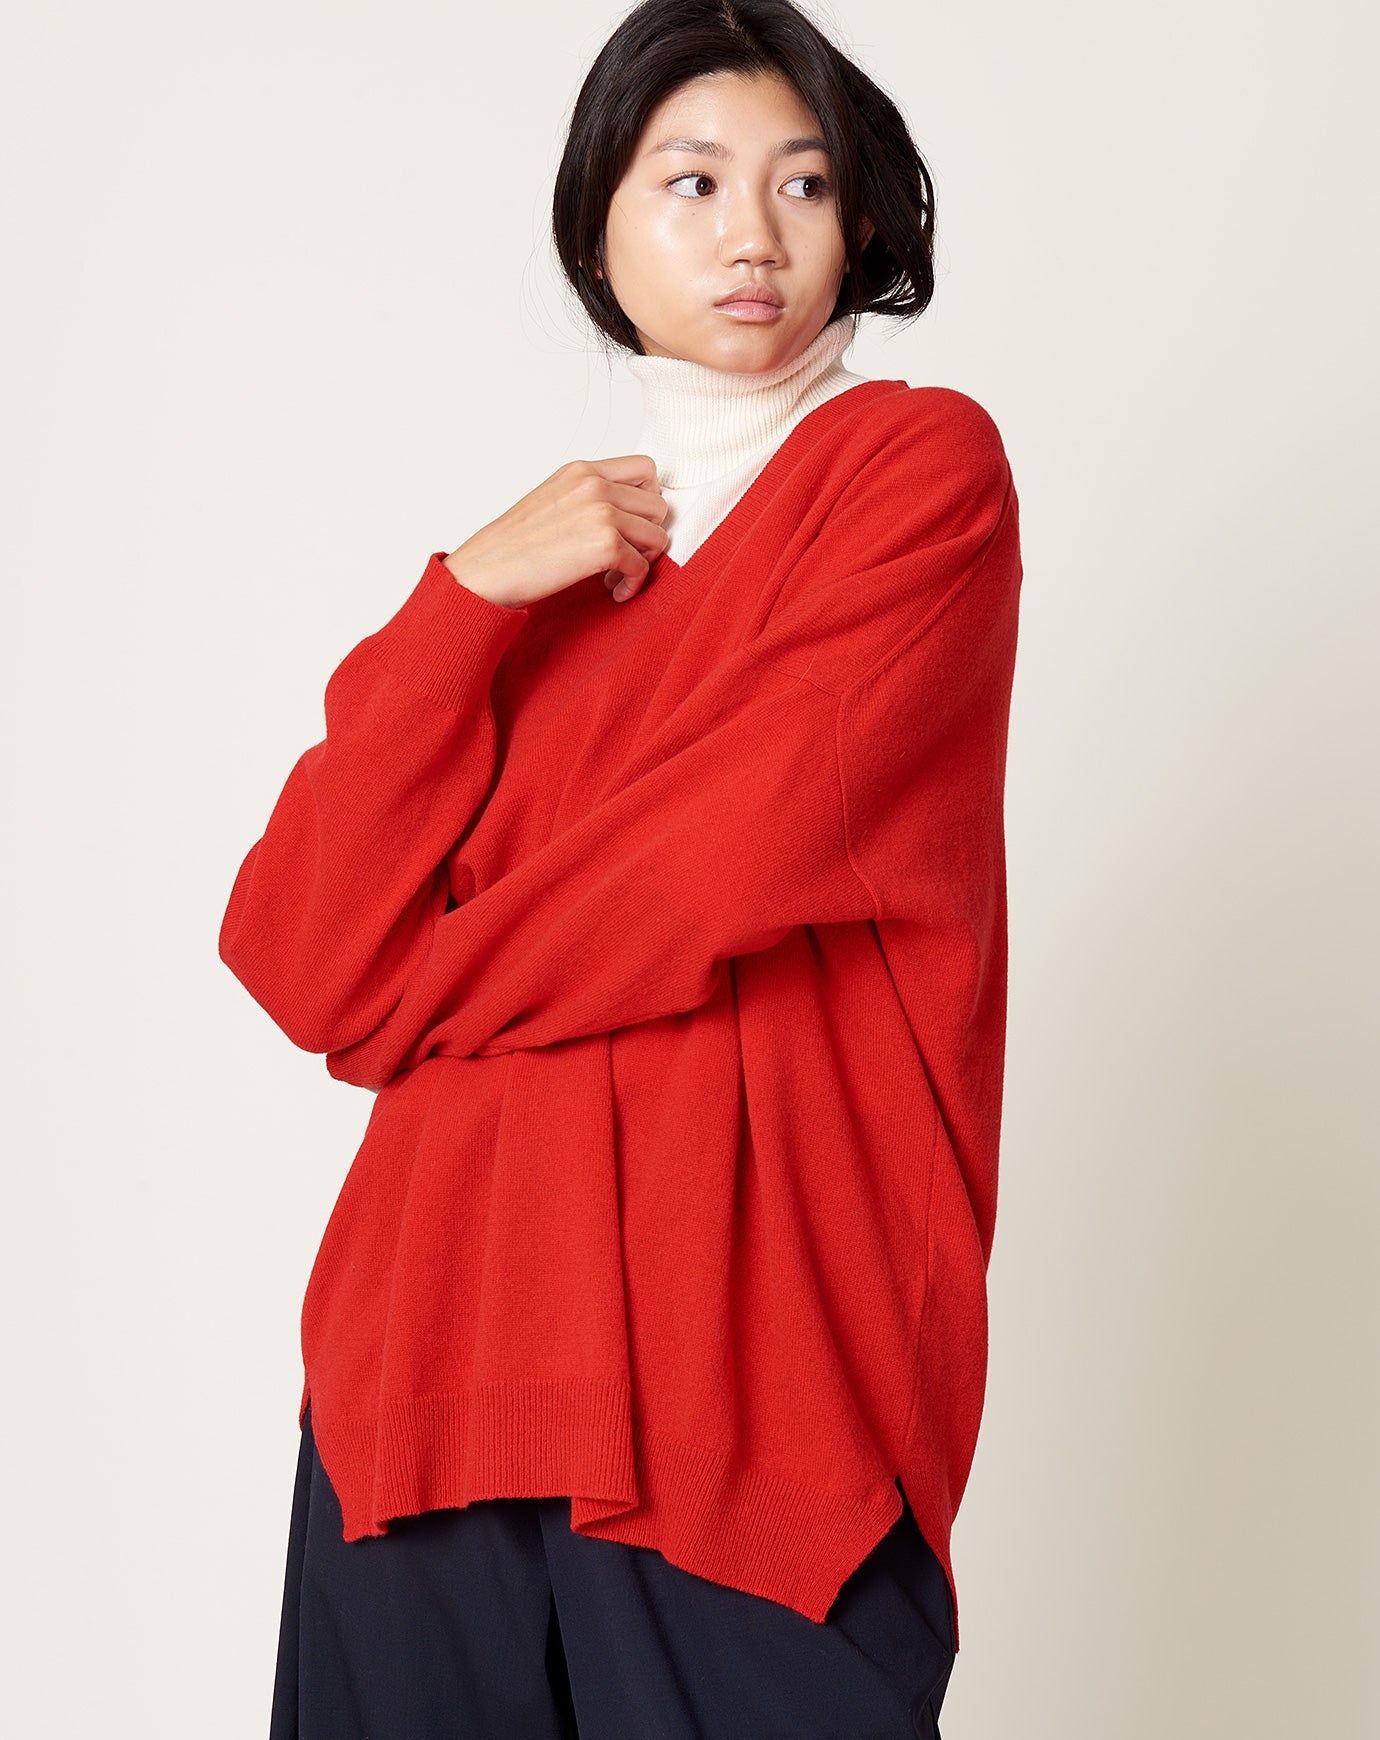 Cordera Cashmere V-Neck Sweater in Red